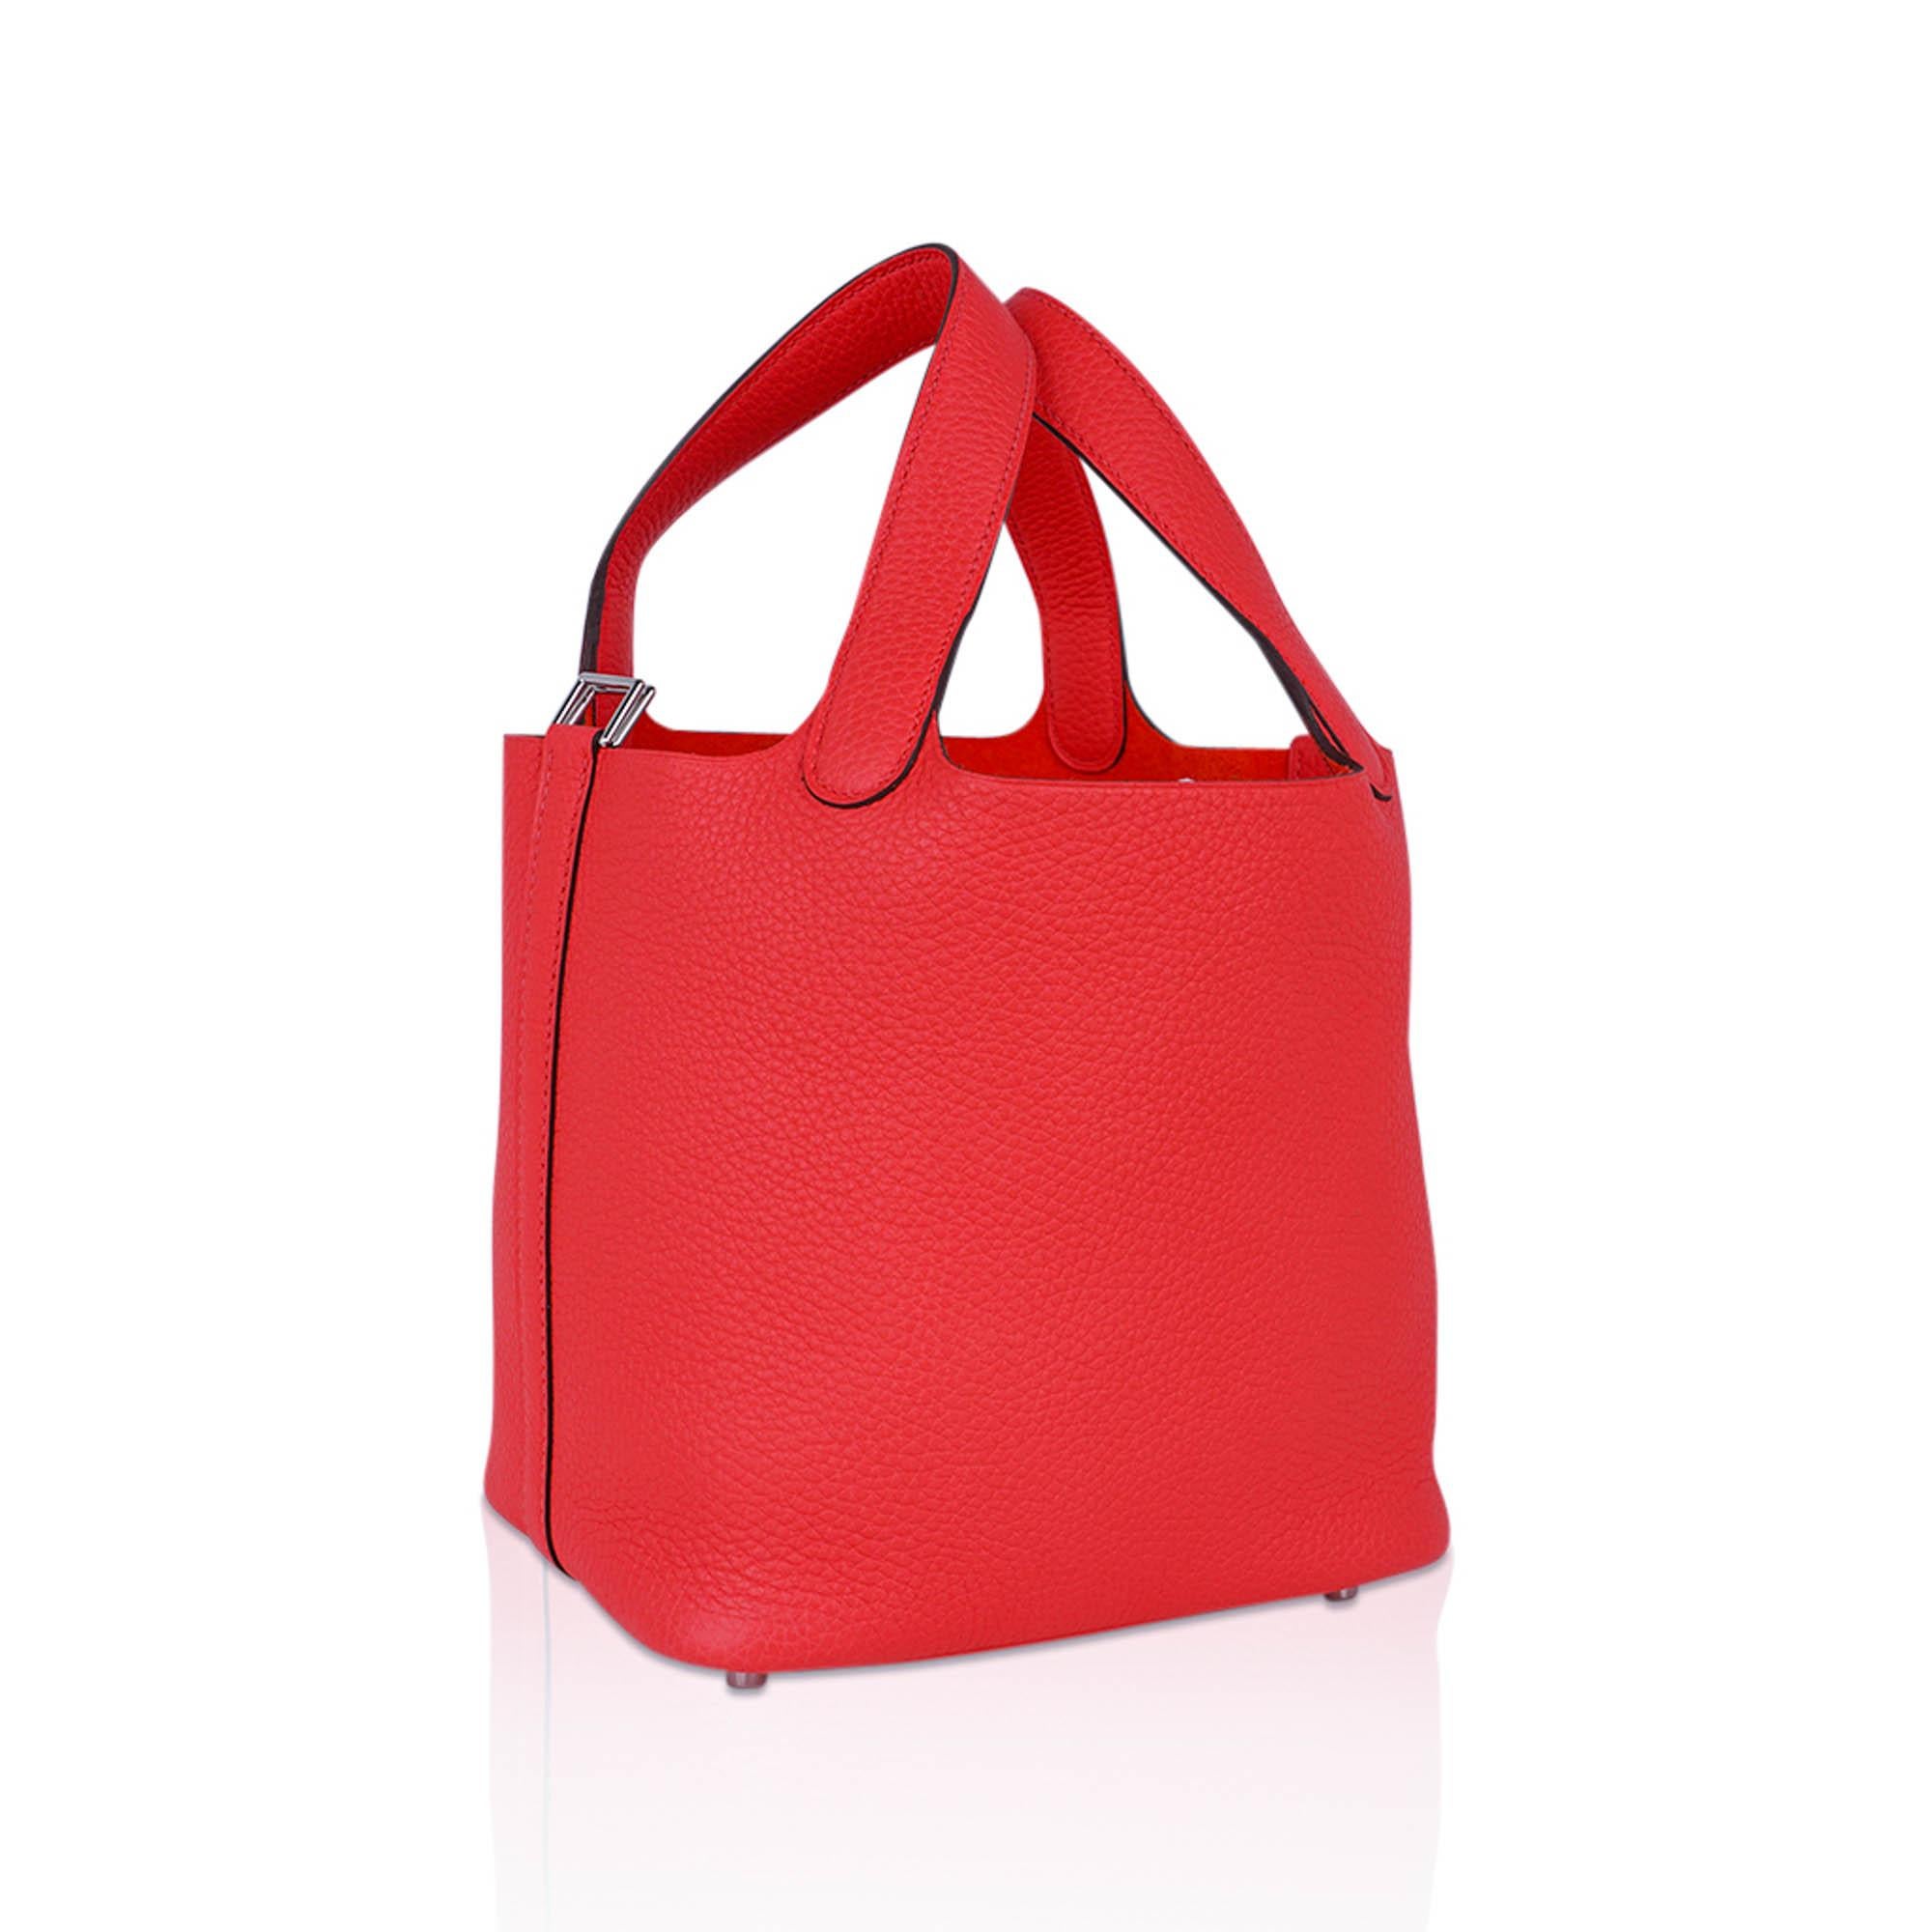 Mightychic offers an Hermes Picotin Lock 18 tote bag featured in Rose Mexico.
Beautiful pop of colour.
This charming Hermes Picotin tote is a perfect everyday go to bag.
Clemence leather with Palladium hardware.
Comes with lock and keys, sleeper,